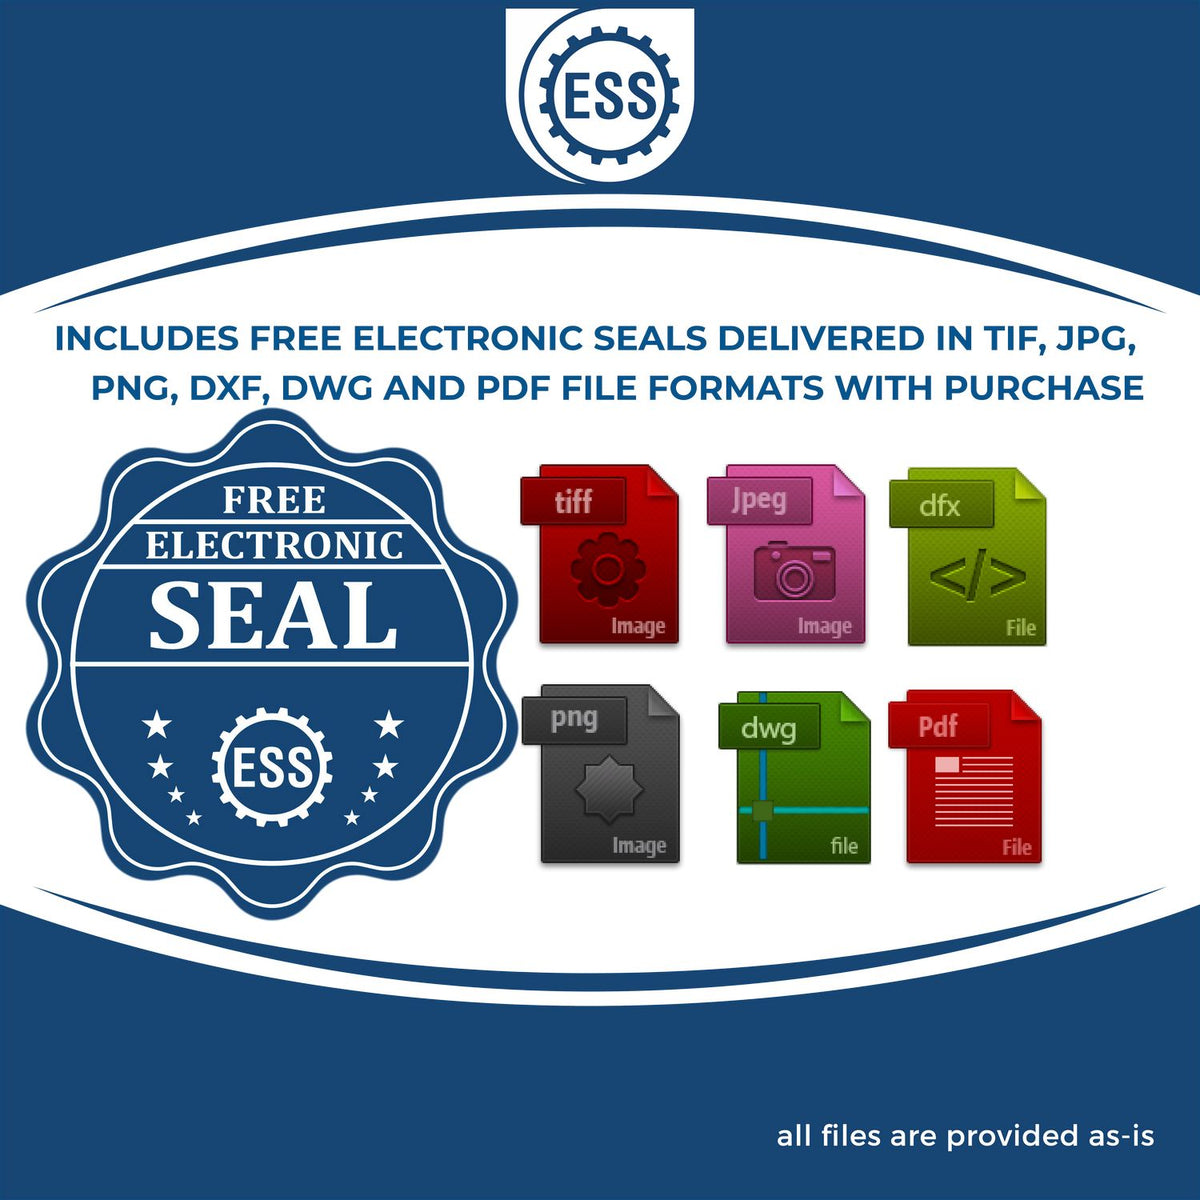 An infographic for the free electronic seal for the PSI North Dakota Notary Stamp illustrating the different file type icons such as DXF, DWG, TIF, JPG and PNG.